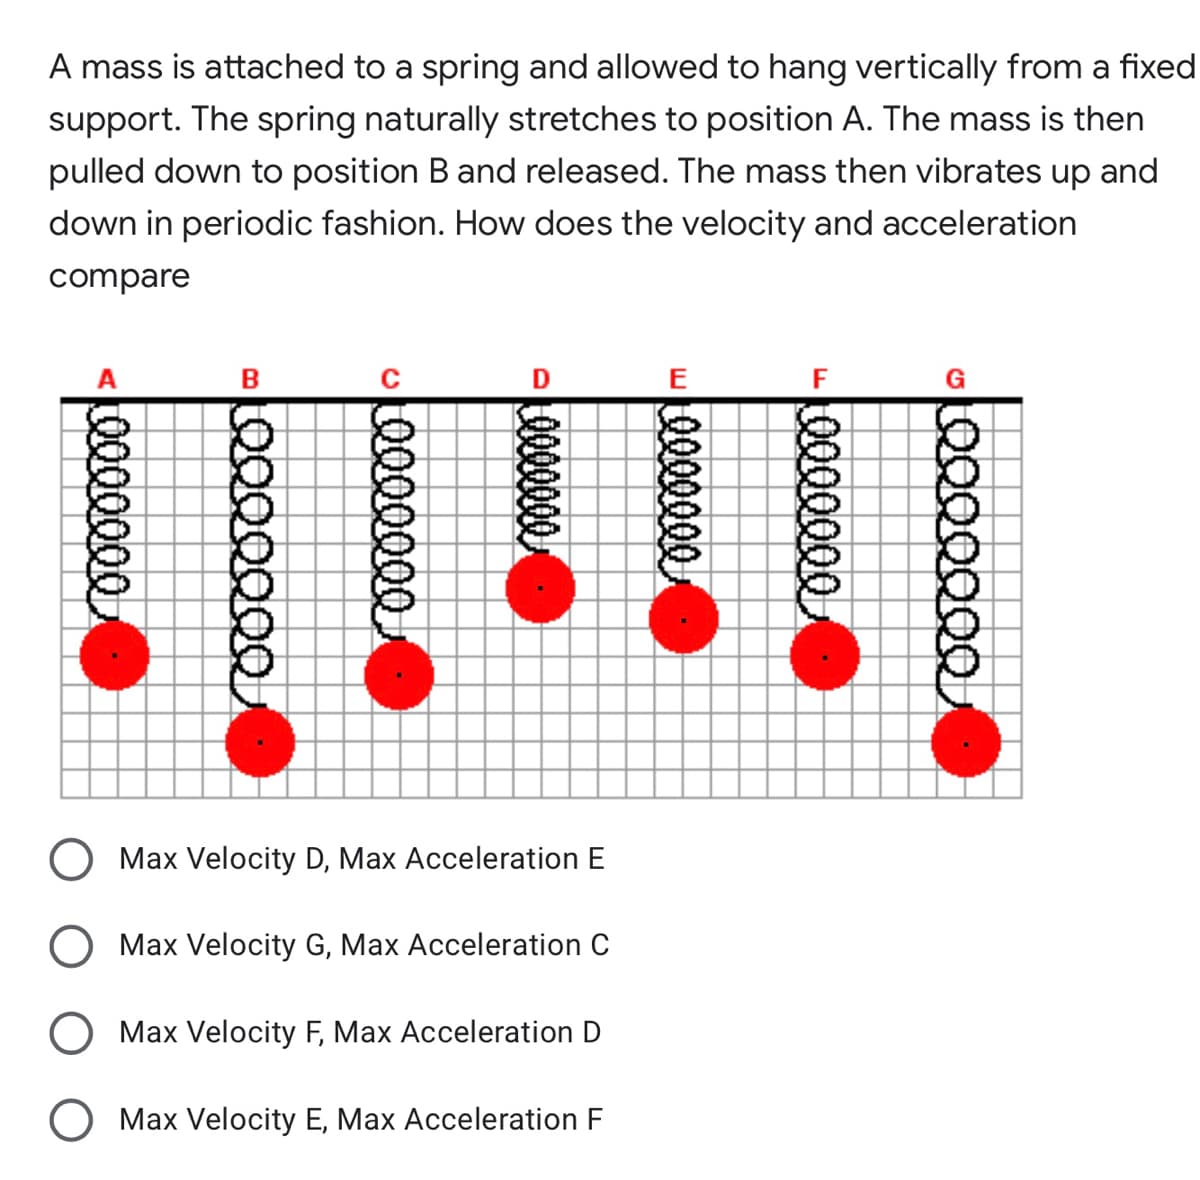 A mass is attached to a spring and allowed to hang vertically from a fixed
support. The spring naturally stretches to position A. The mass is then
pulled down to position B and released. The mass then vibrates up and
down in periodic fashion. How does the velocity and acceleration
compare
E
F
O Max Velocity D, Max Acceleration E
O Max Velocity G, Max Acceleration C
Max Velocity F, Max Acceleration D
O Max Velocity E, Max Acceleration F
0000000
0000000
